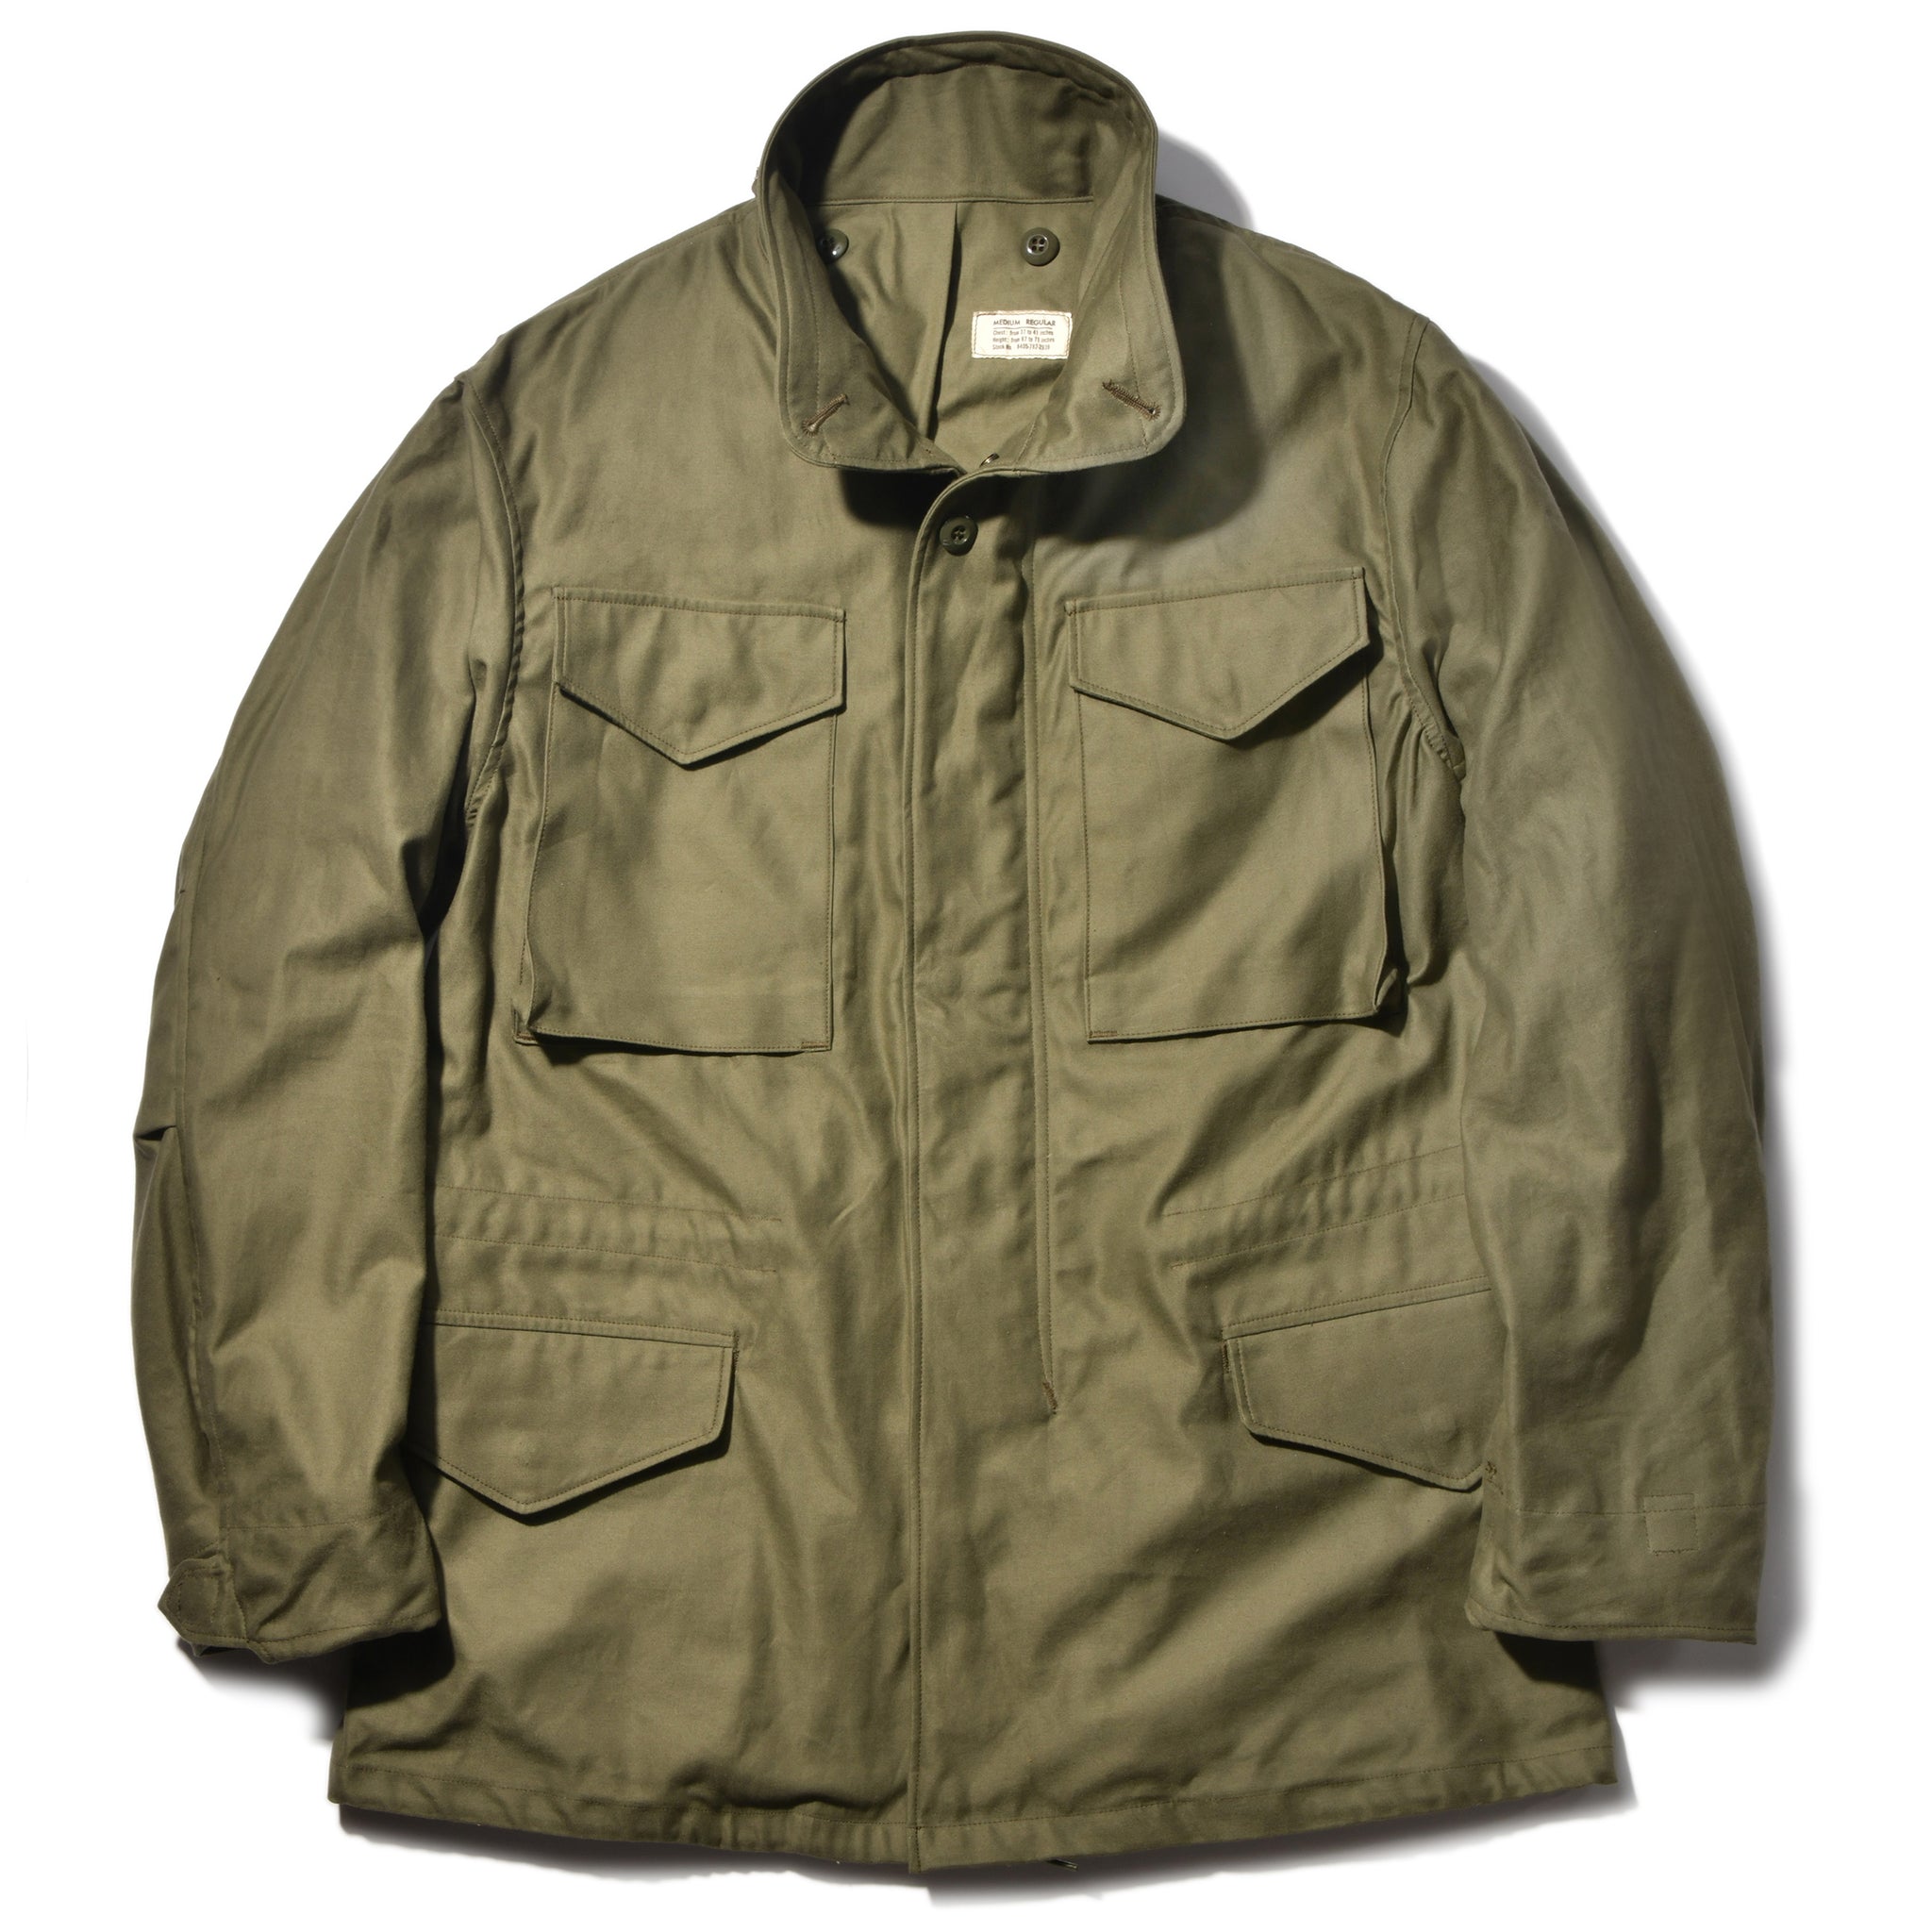 Outerwear – The Real McCoy's